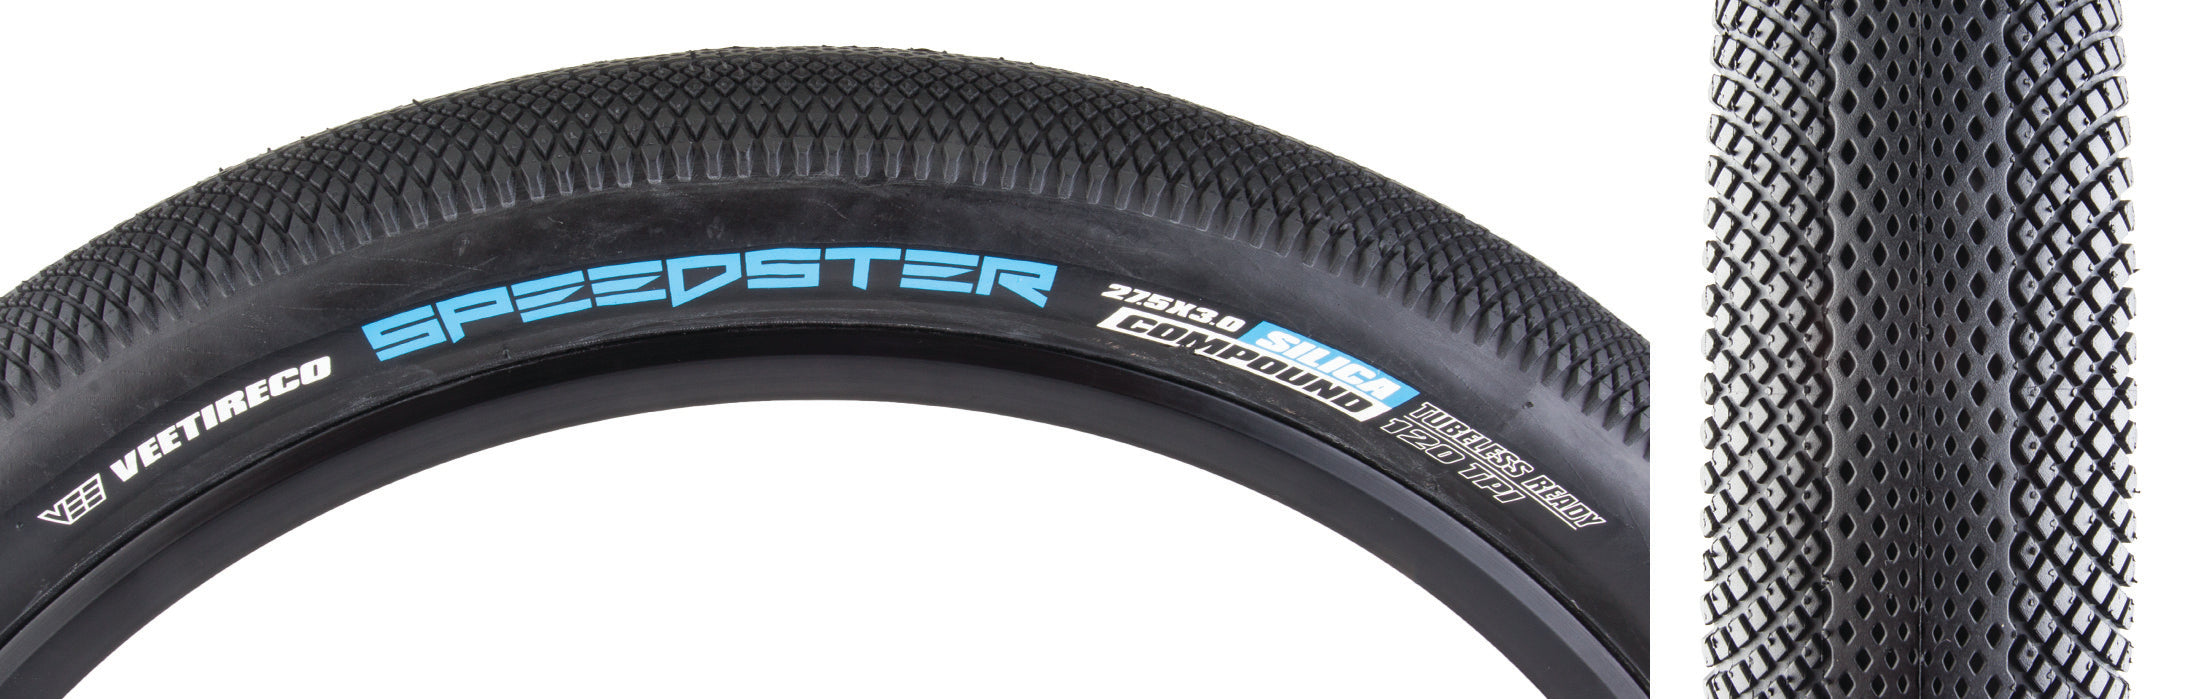 27.5" fat tire see tire co speedster 27.5" x 3.0" beast mode tire replacement mountain bike tires tube street tires bicycle tires wheel 